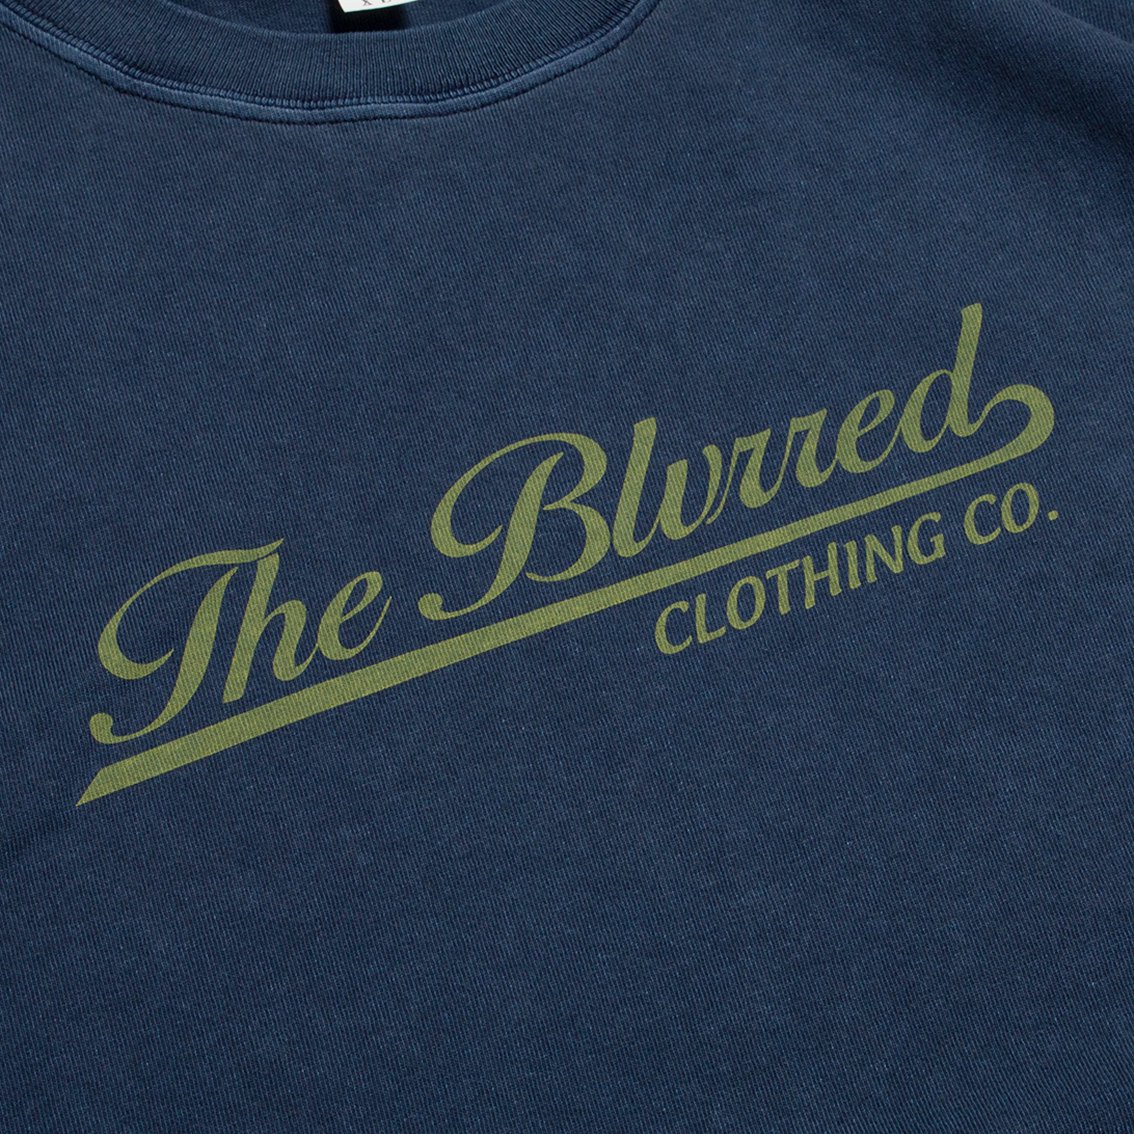 BLURRED CLOTHING / ブラードクロージング] ADVERTISING T-SHIRTS T